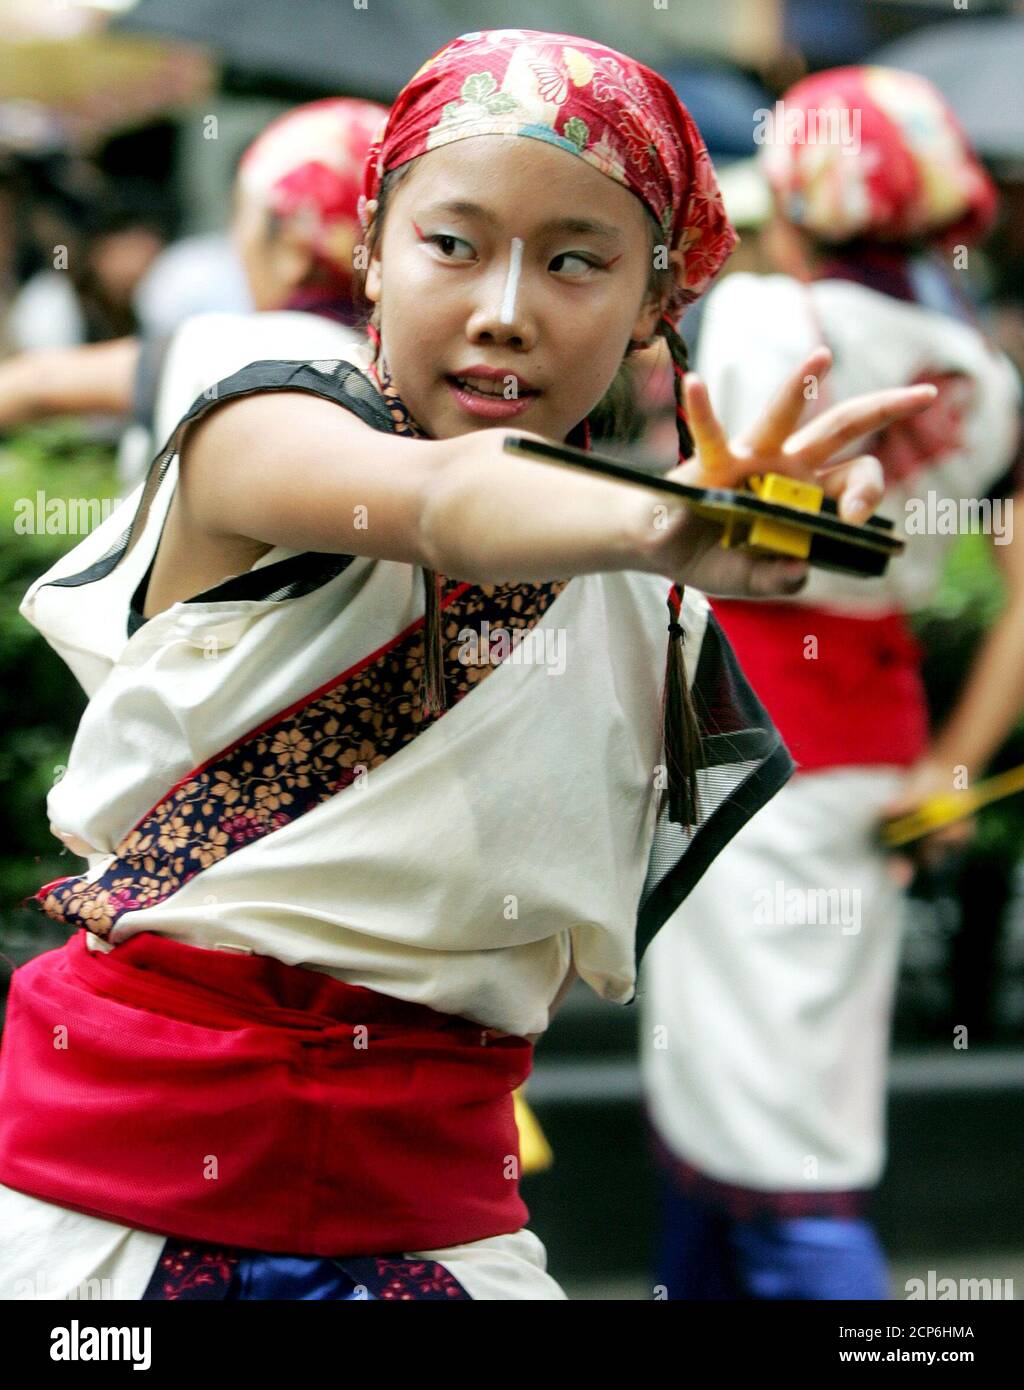 A Japanese girl dances with 'naruko' or clappers in her hands during Yosakoi festival in Tokyo August 29, 2004. About 6,000 dancers in colourful costumes from all over Japan took part in the festival, according to the organisers. REUTERS/Yuriko Nakao  YN/LA Stock Photo